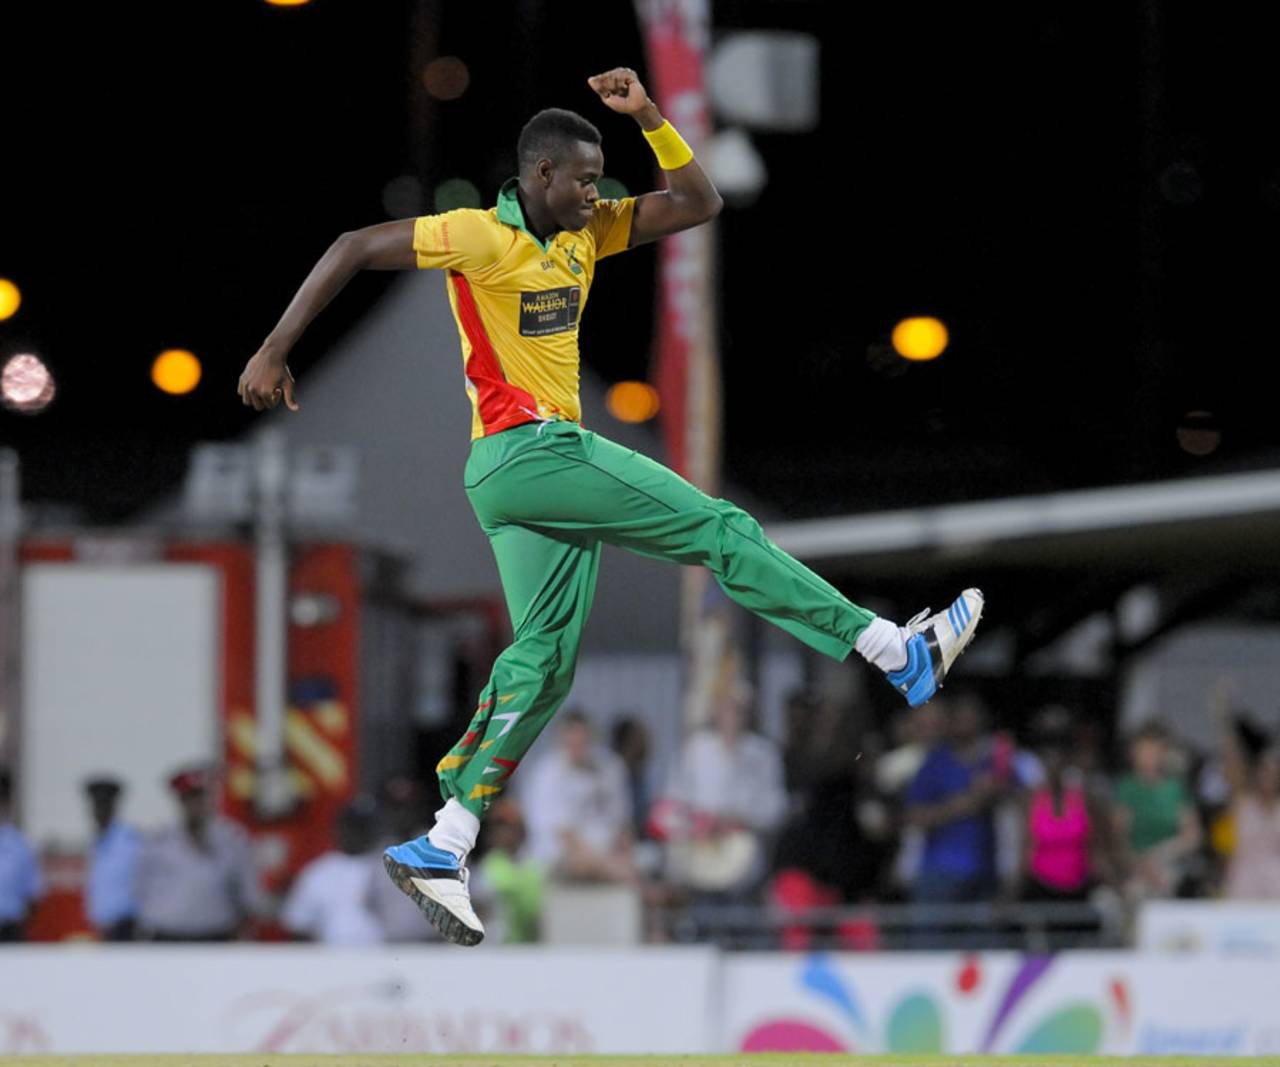 Ronsford Beaton celebrates after a wicket, Barbados Tridents v Guyana Amazon Warriors, CPL 2014, Bridgetown, July 26, 2014